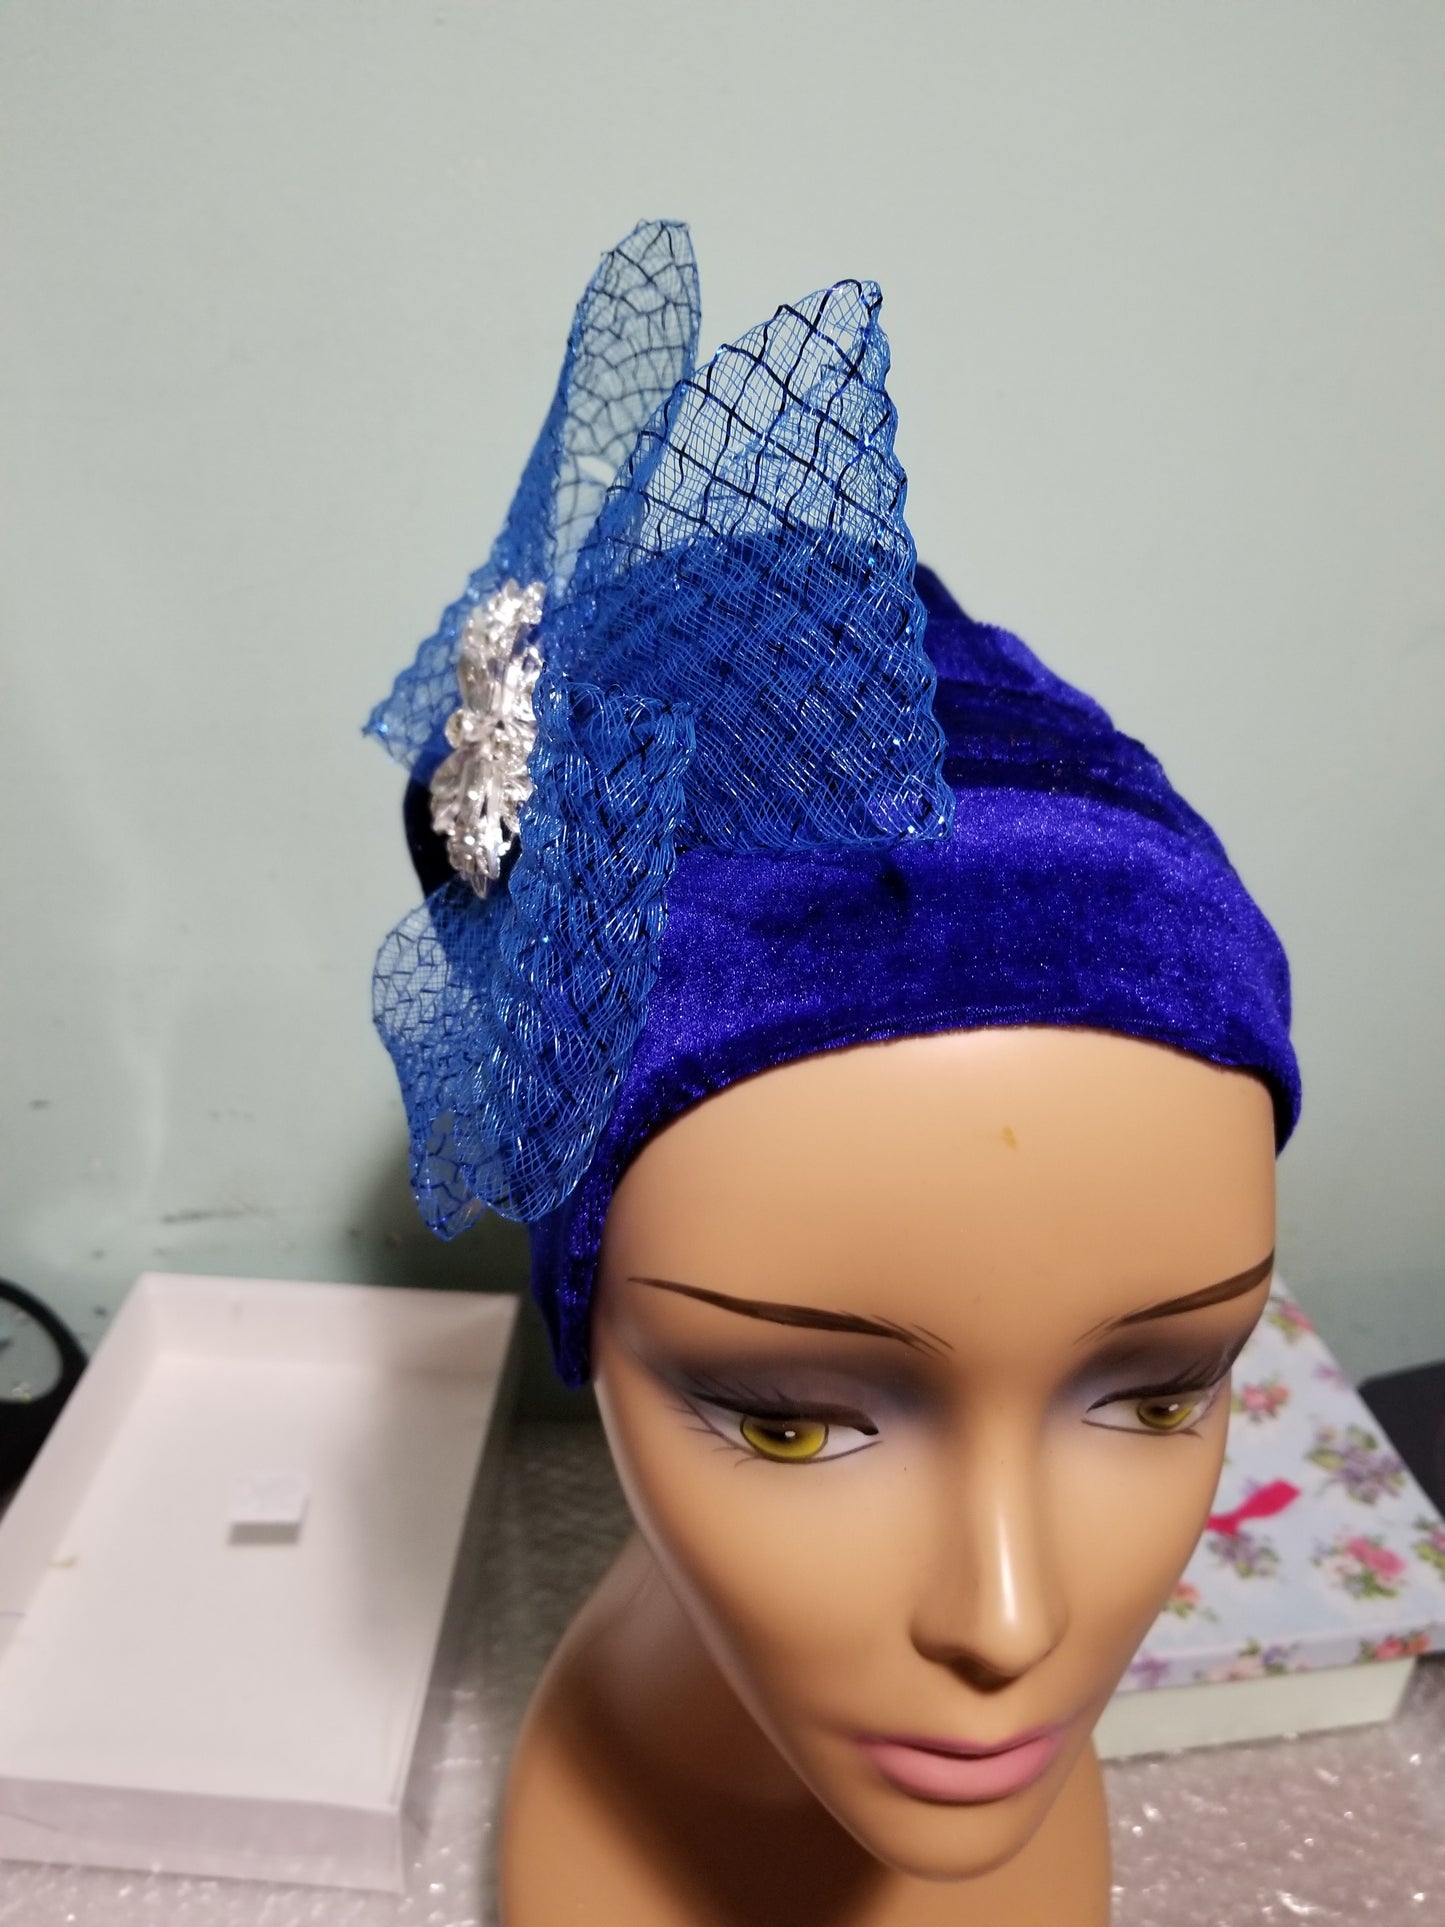 Soft Velvet/net royal blue  color Women-turban. One size fit all turban. Beautiful flower design with a side brooch/beaded and stoned to add decor to your turban